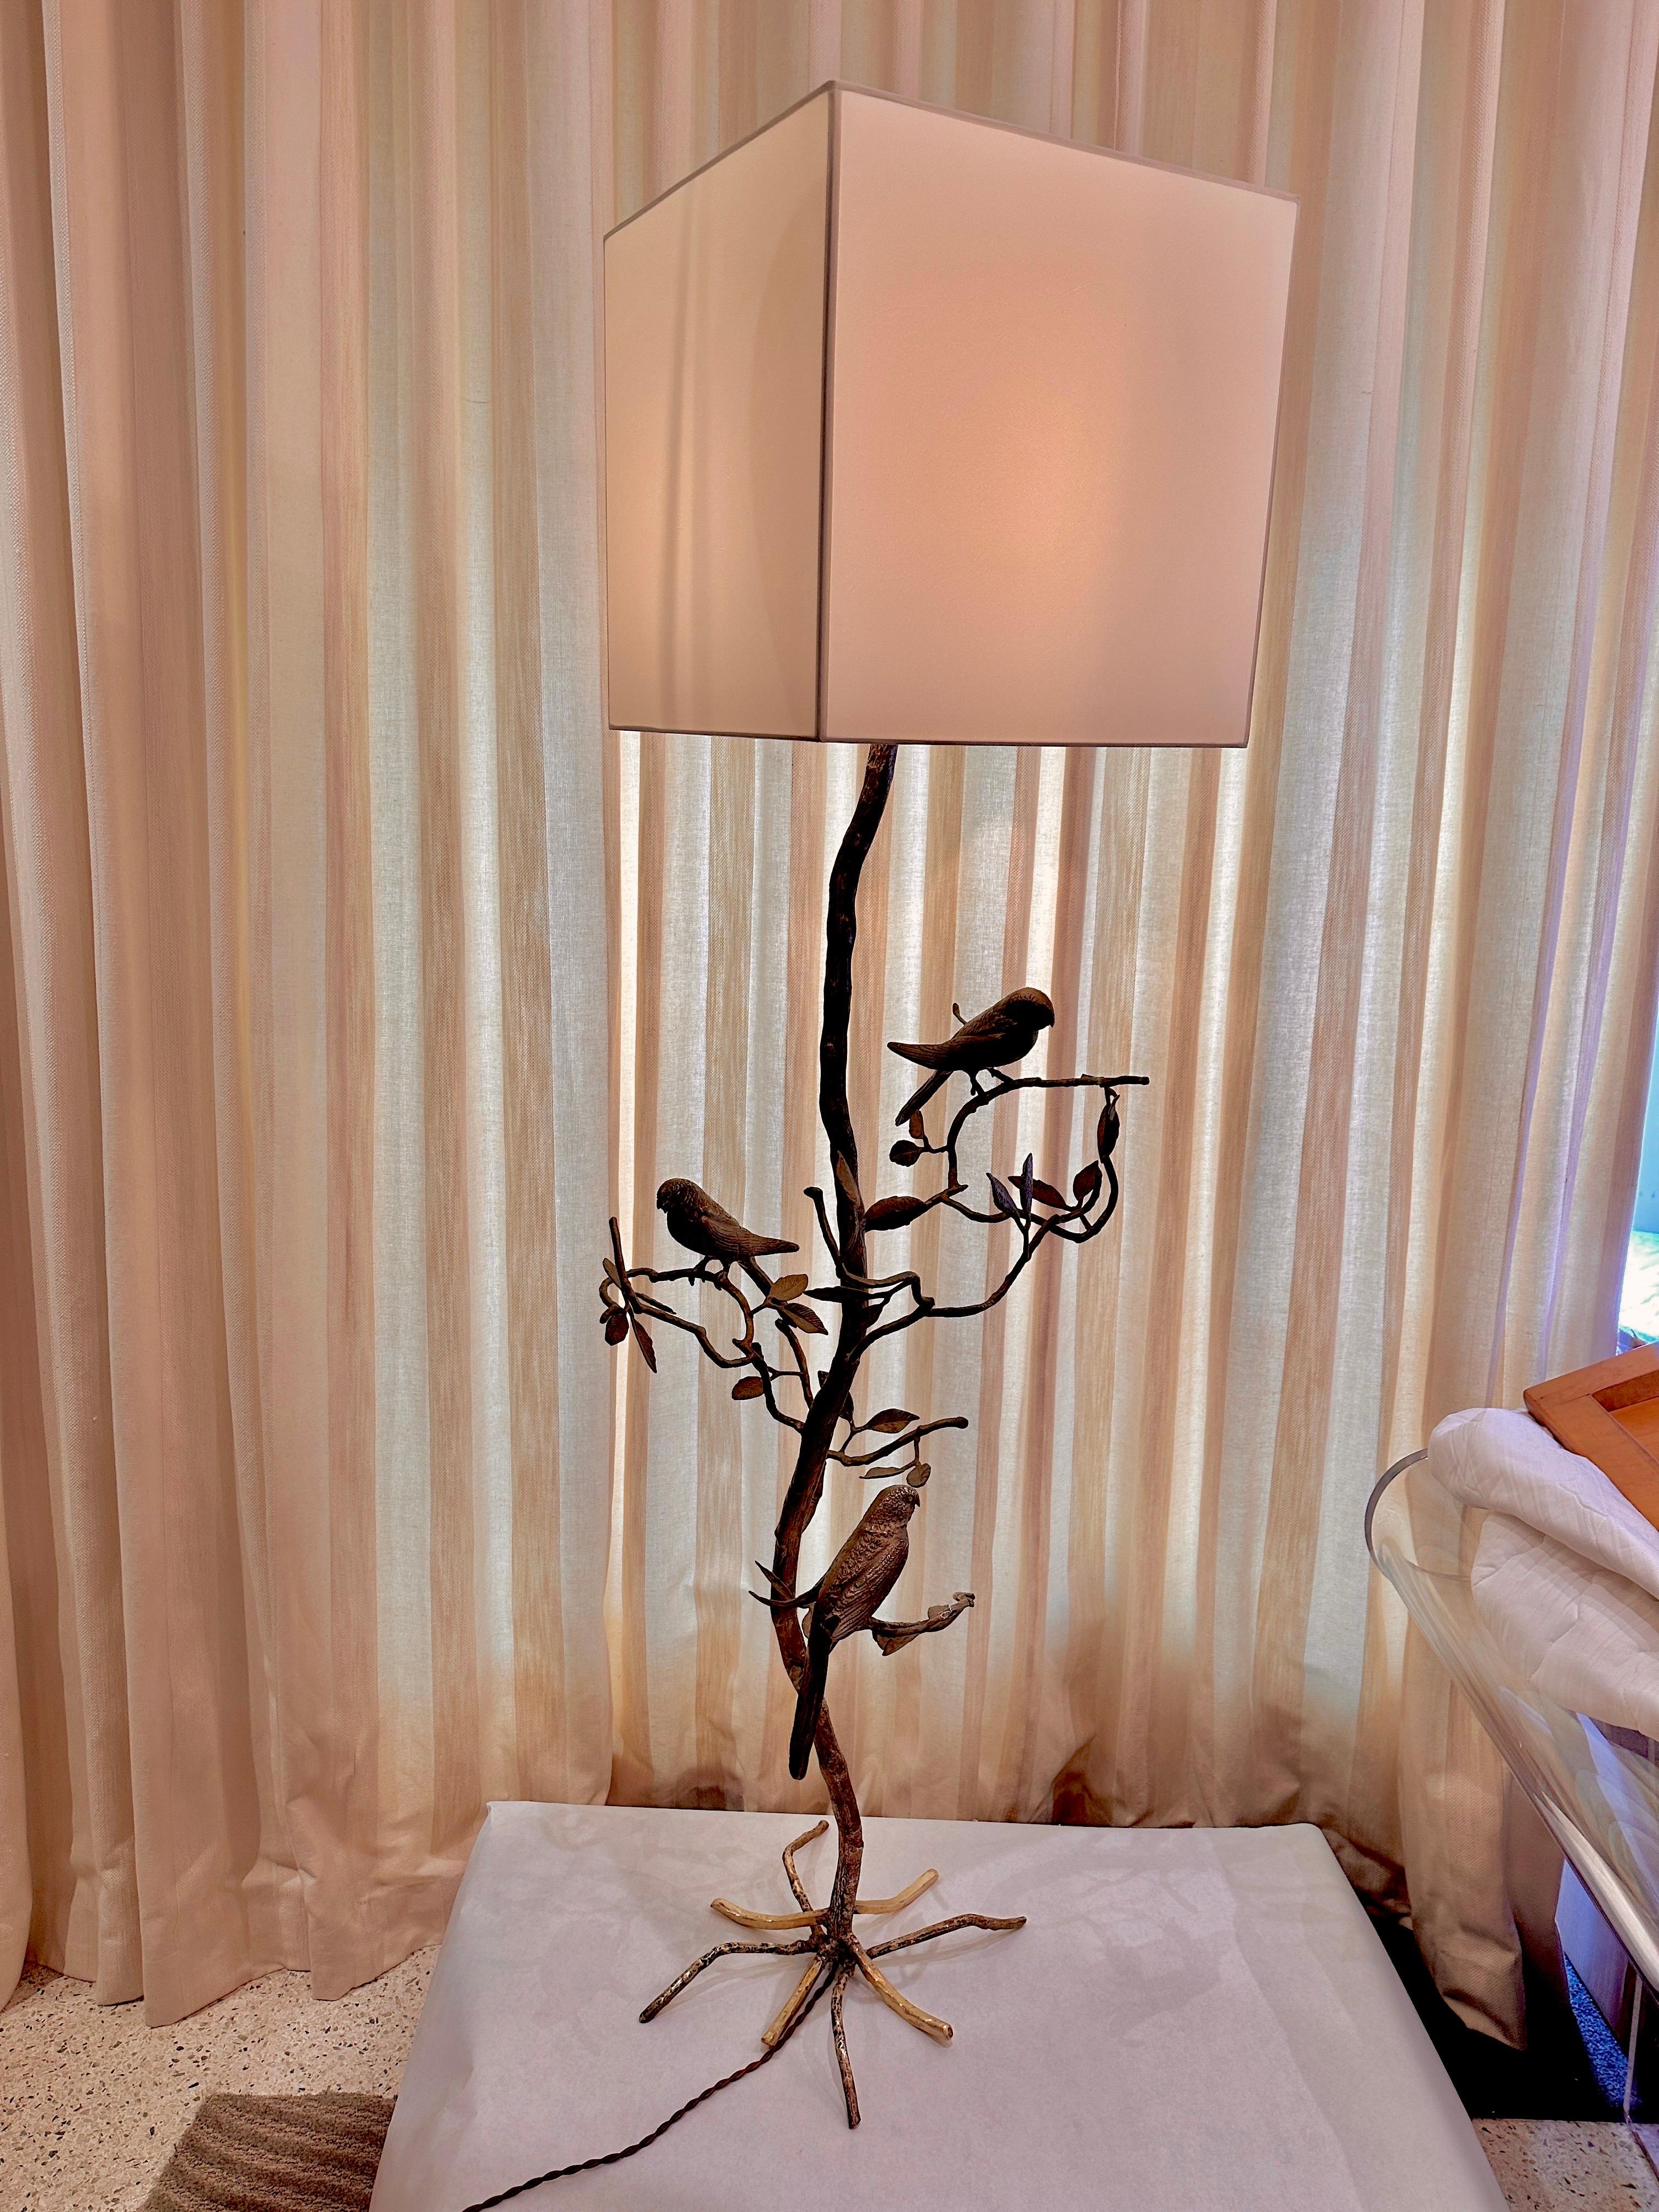 Vintage Bronze Floor Lamp with Parrots on Tree For Sale 2